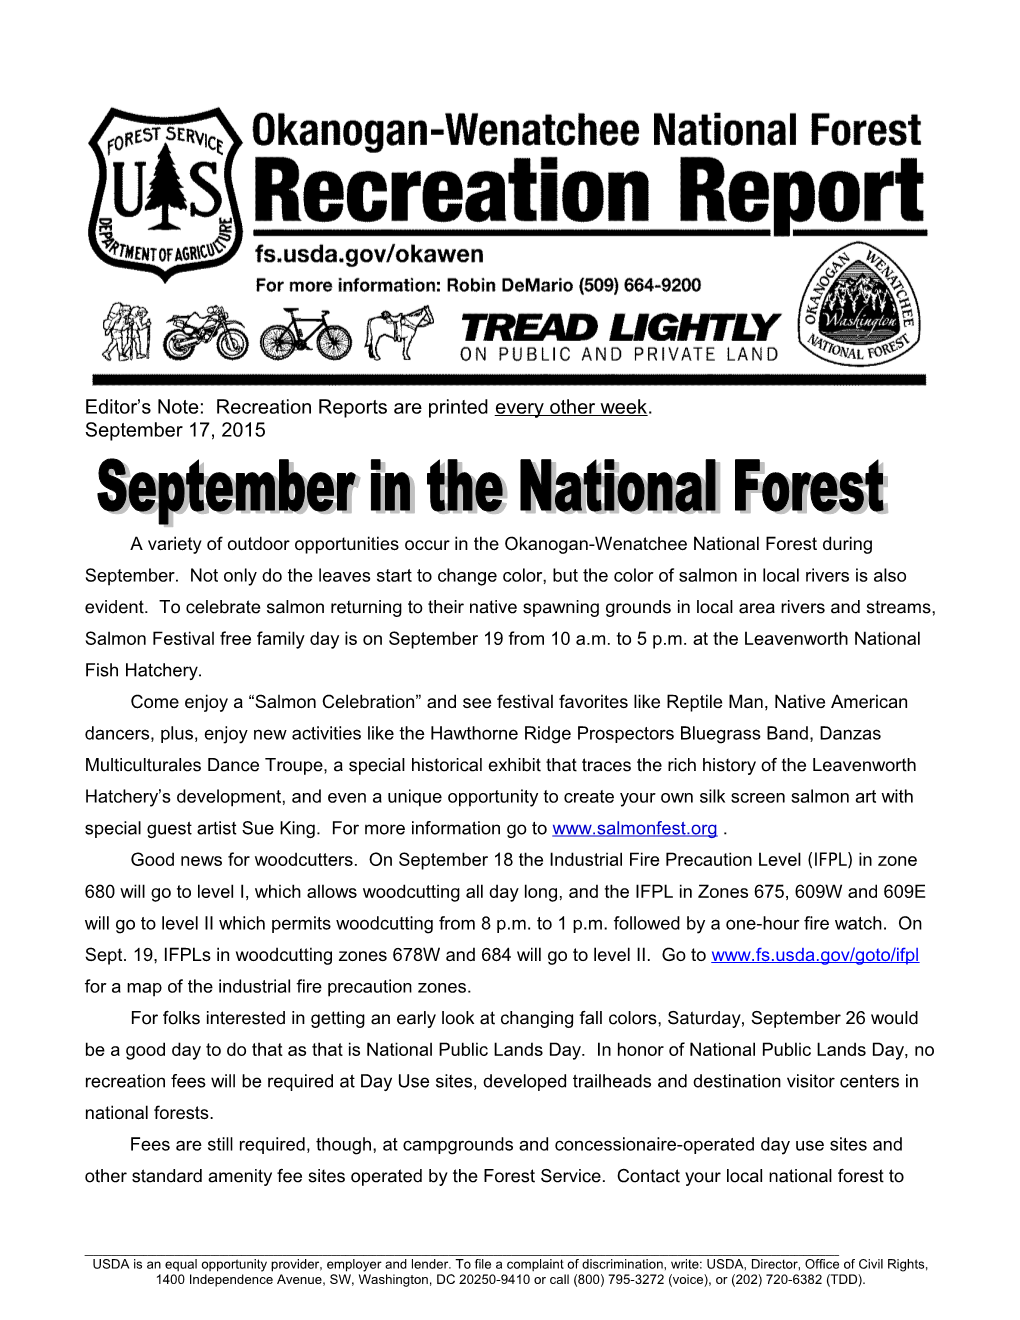 Editor S Note: Recreation Reports Are Printed Every Week Through Memorial Day s1